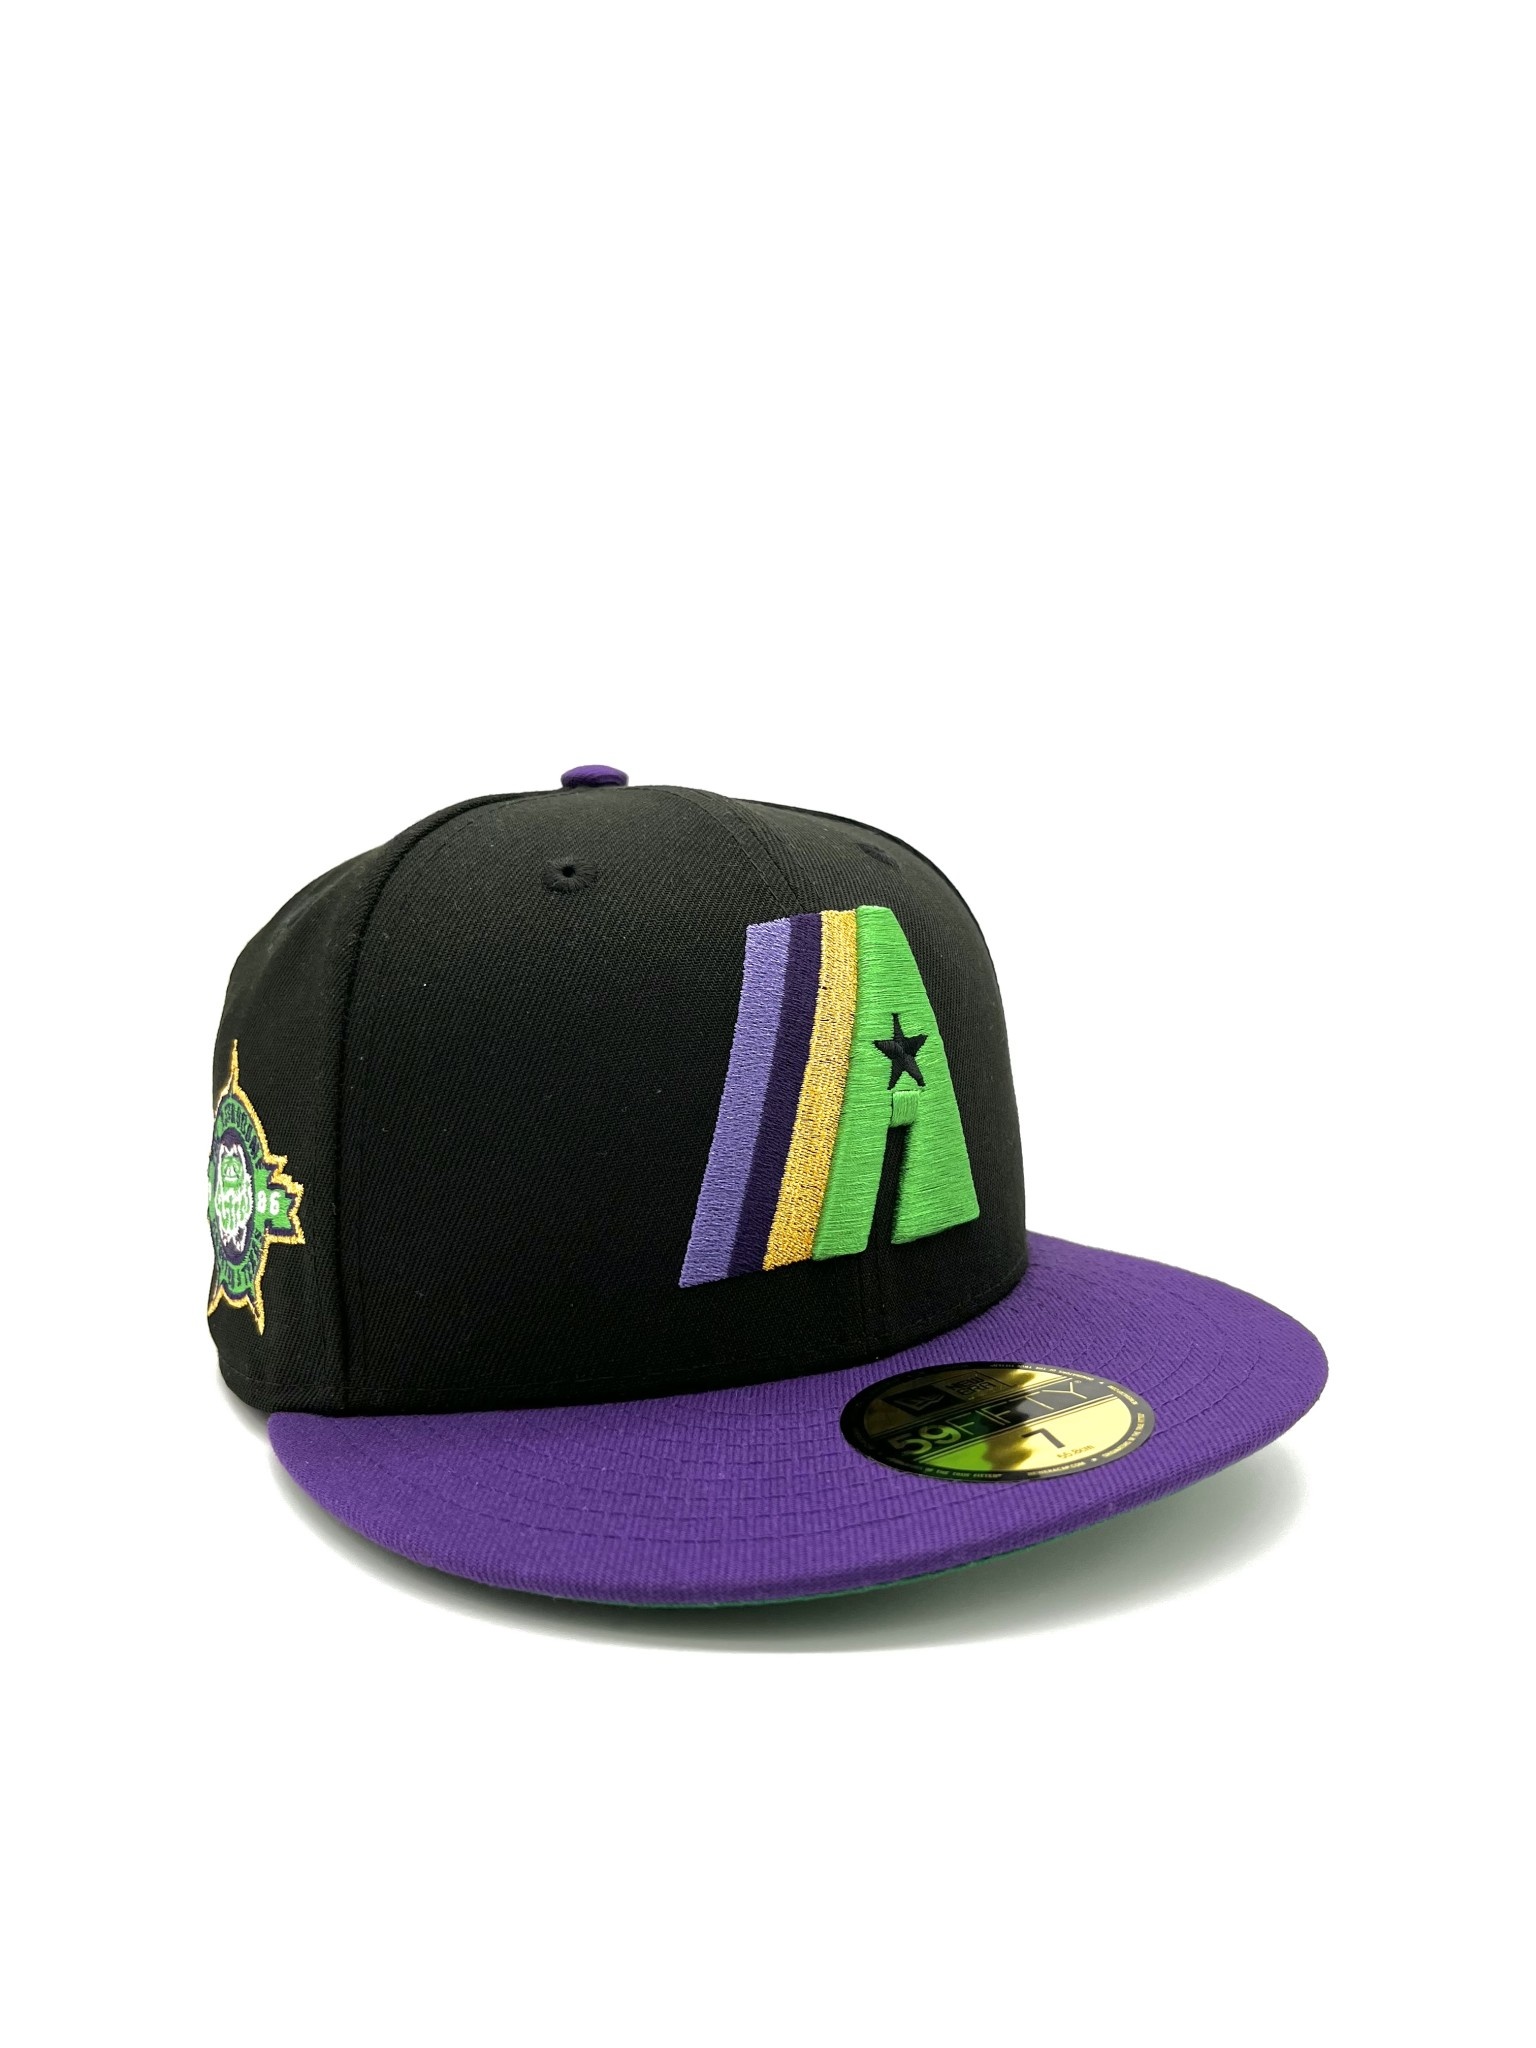 X-Men Logo Vintage Colorway New Era 59Fifty Fitted Hat-7 1/2